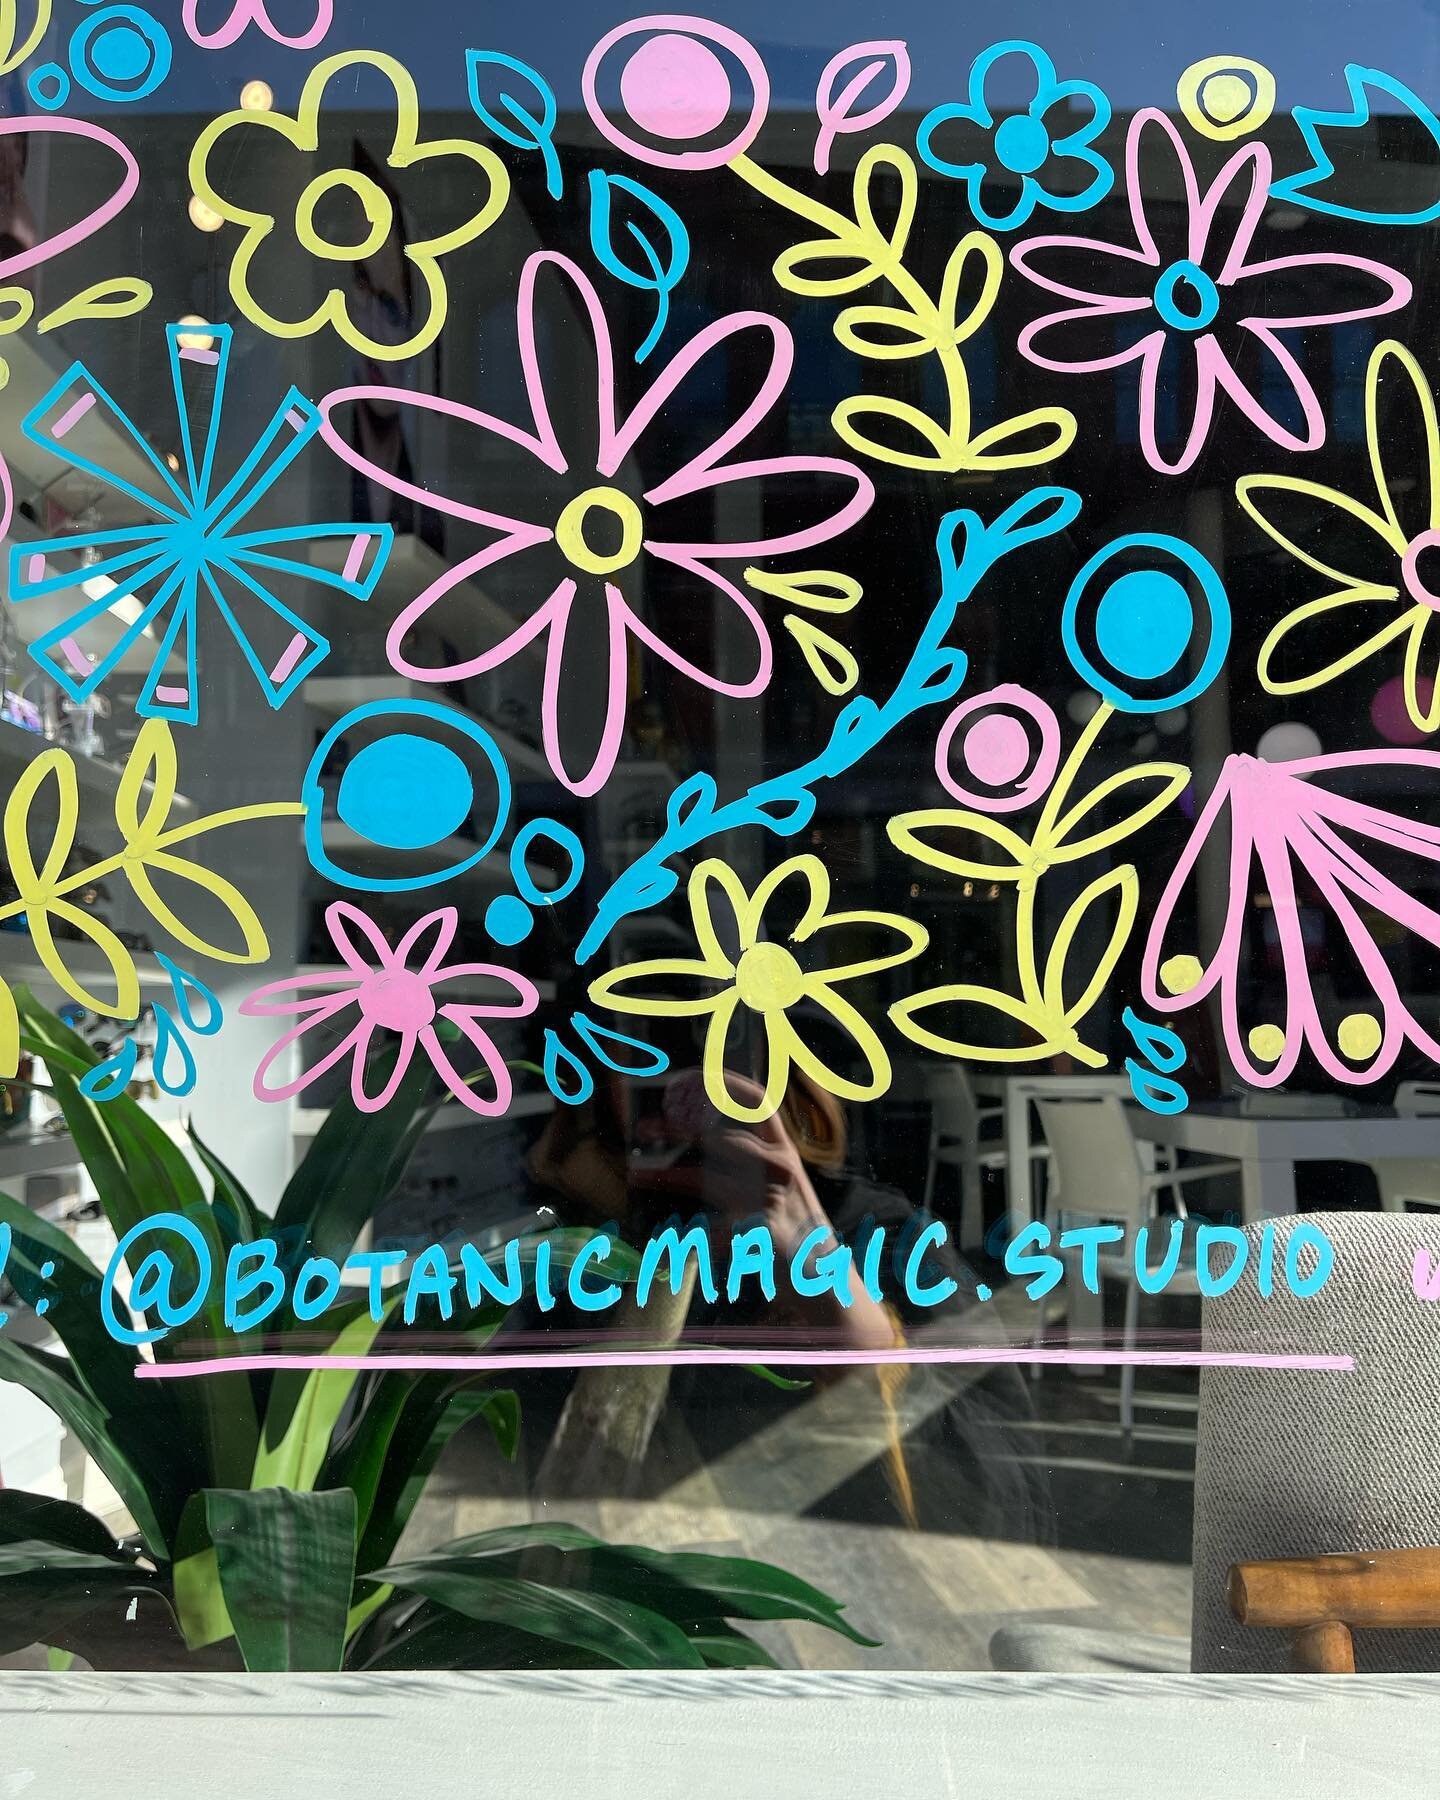 Most of my window paintings take less than 6 hours to install. 🌼The longest amount of time that one of my paintings has been up is 8 months, and it looked great the day I took it down! 🌸The color that fades the fastest is yellow. 🌷Go to my stories